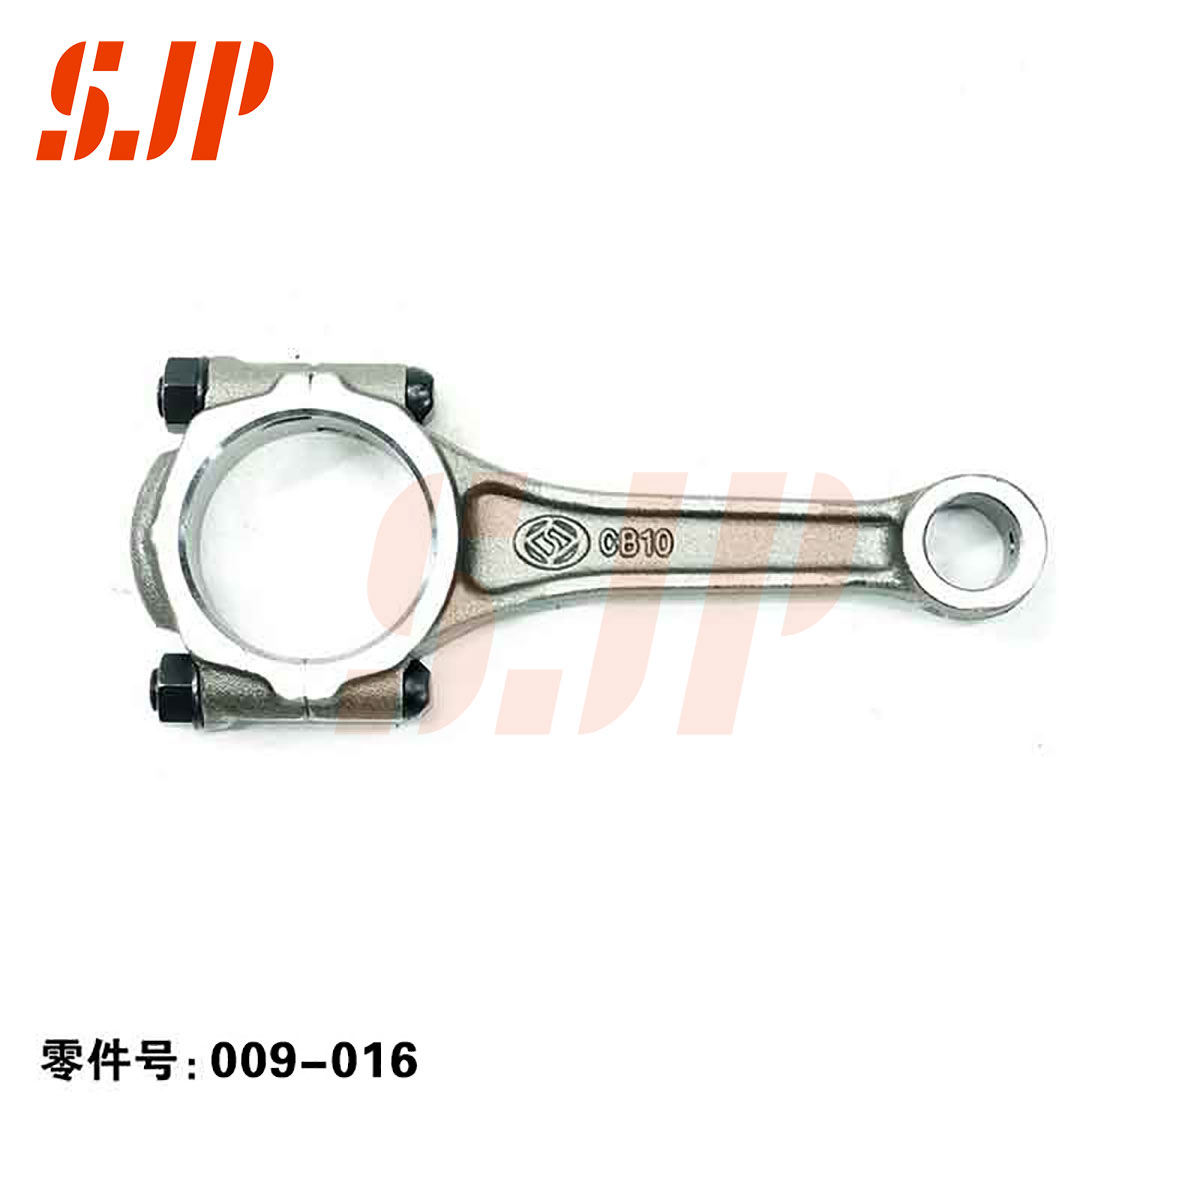 SJ-009-016 Connecting Rod For Changan Auto CB10